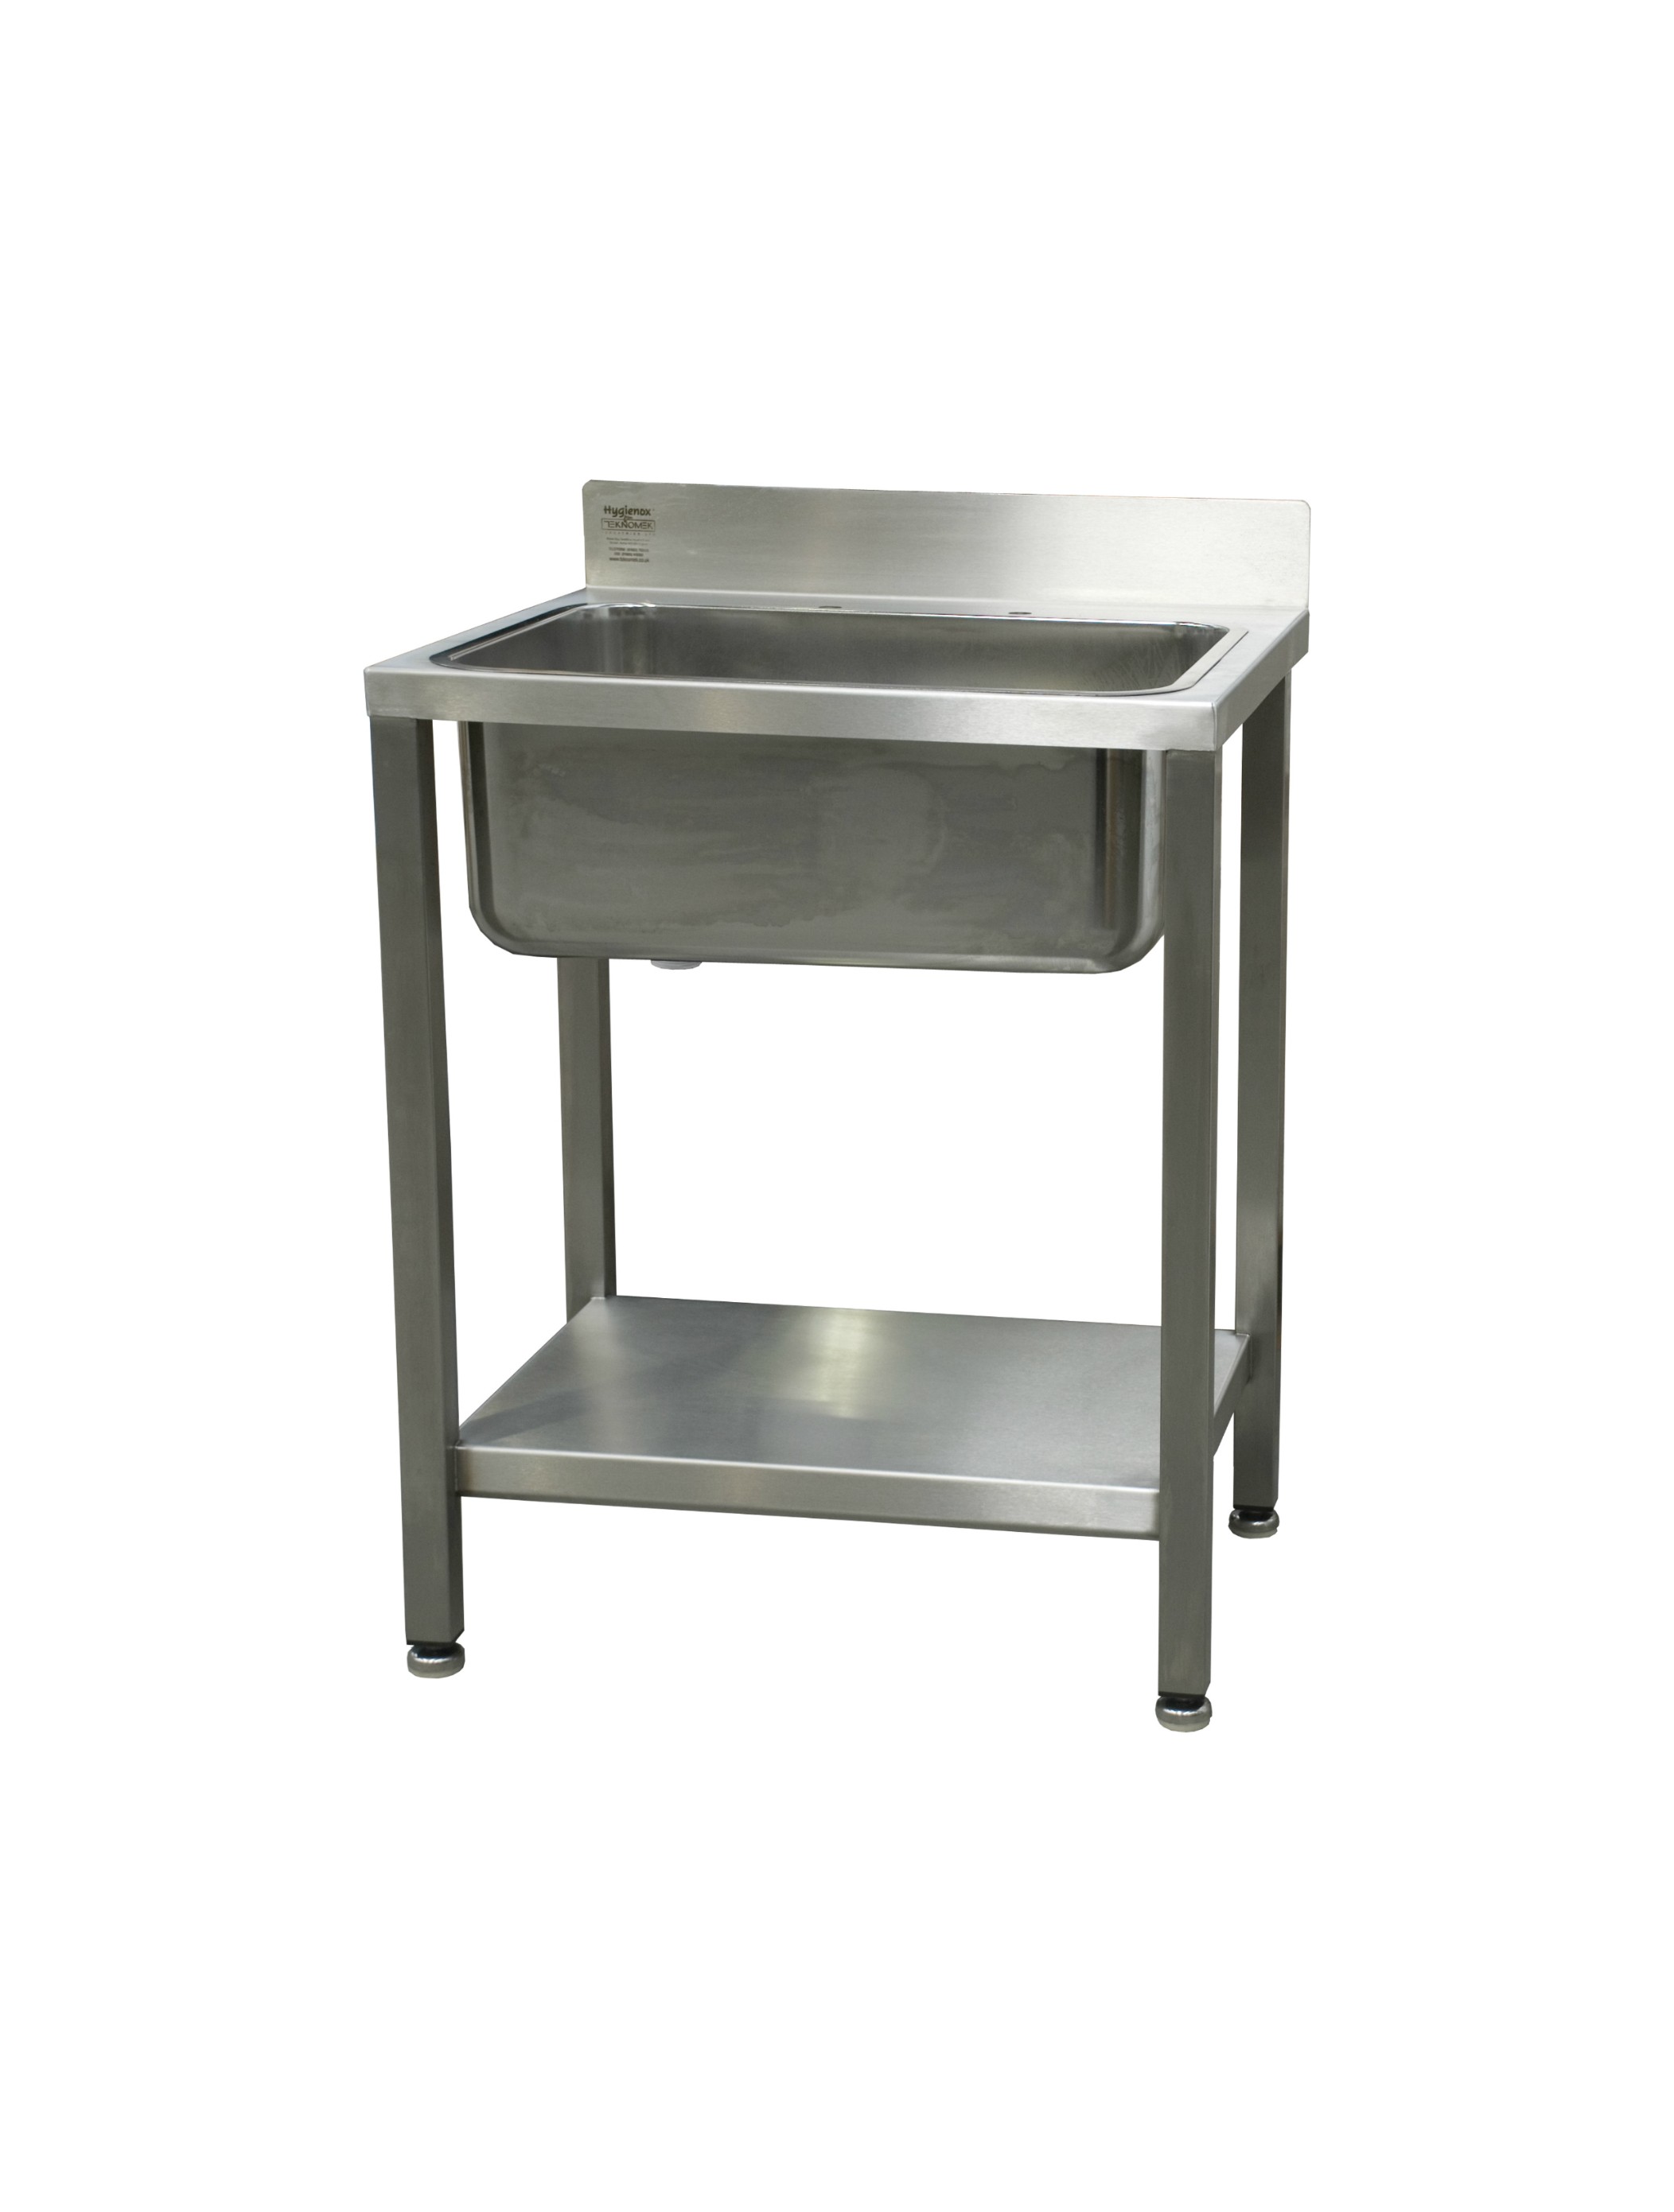 Free Standing Stainless Steel Sink